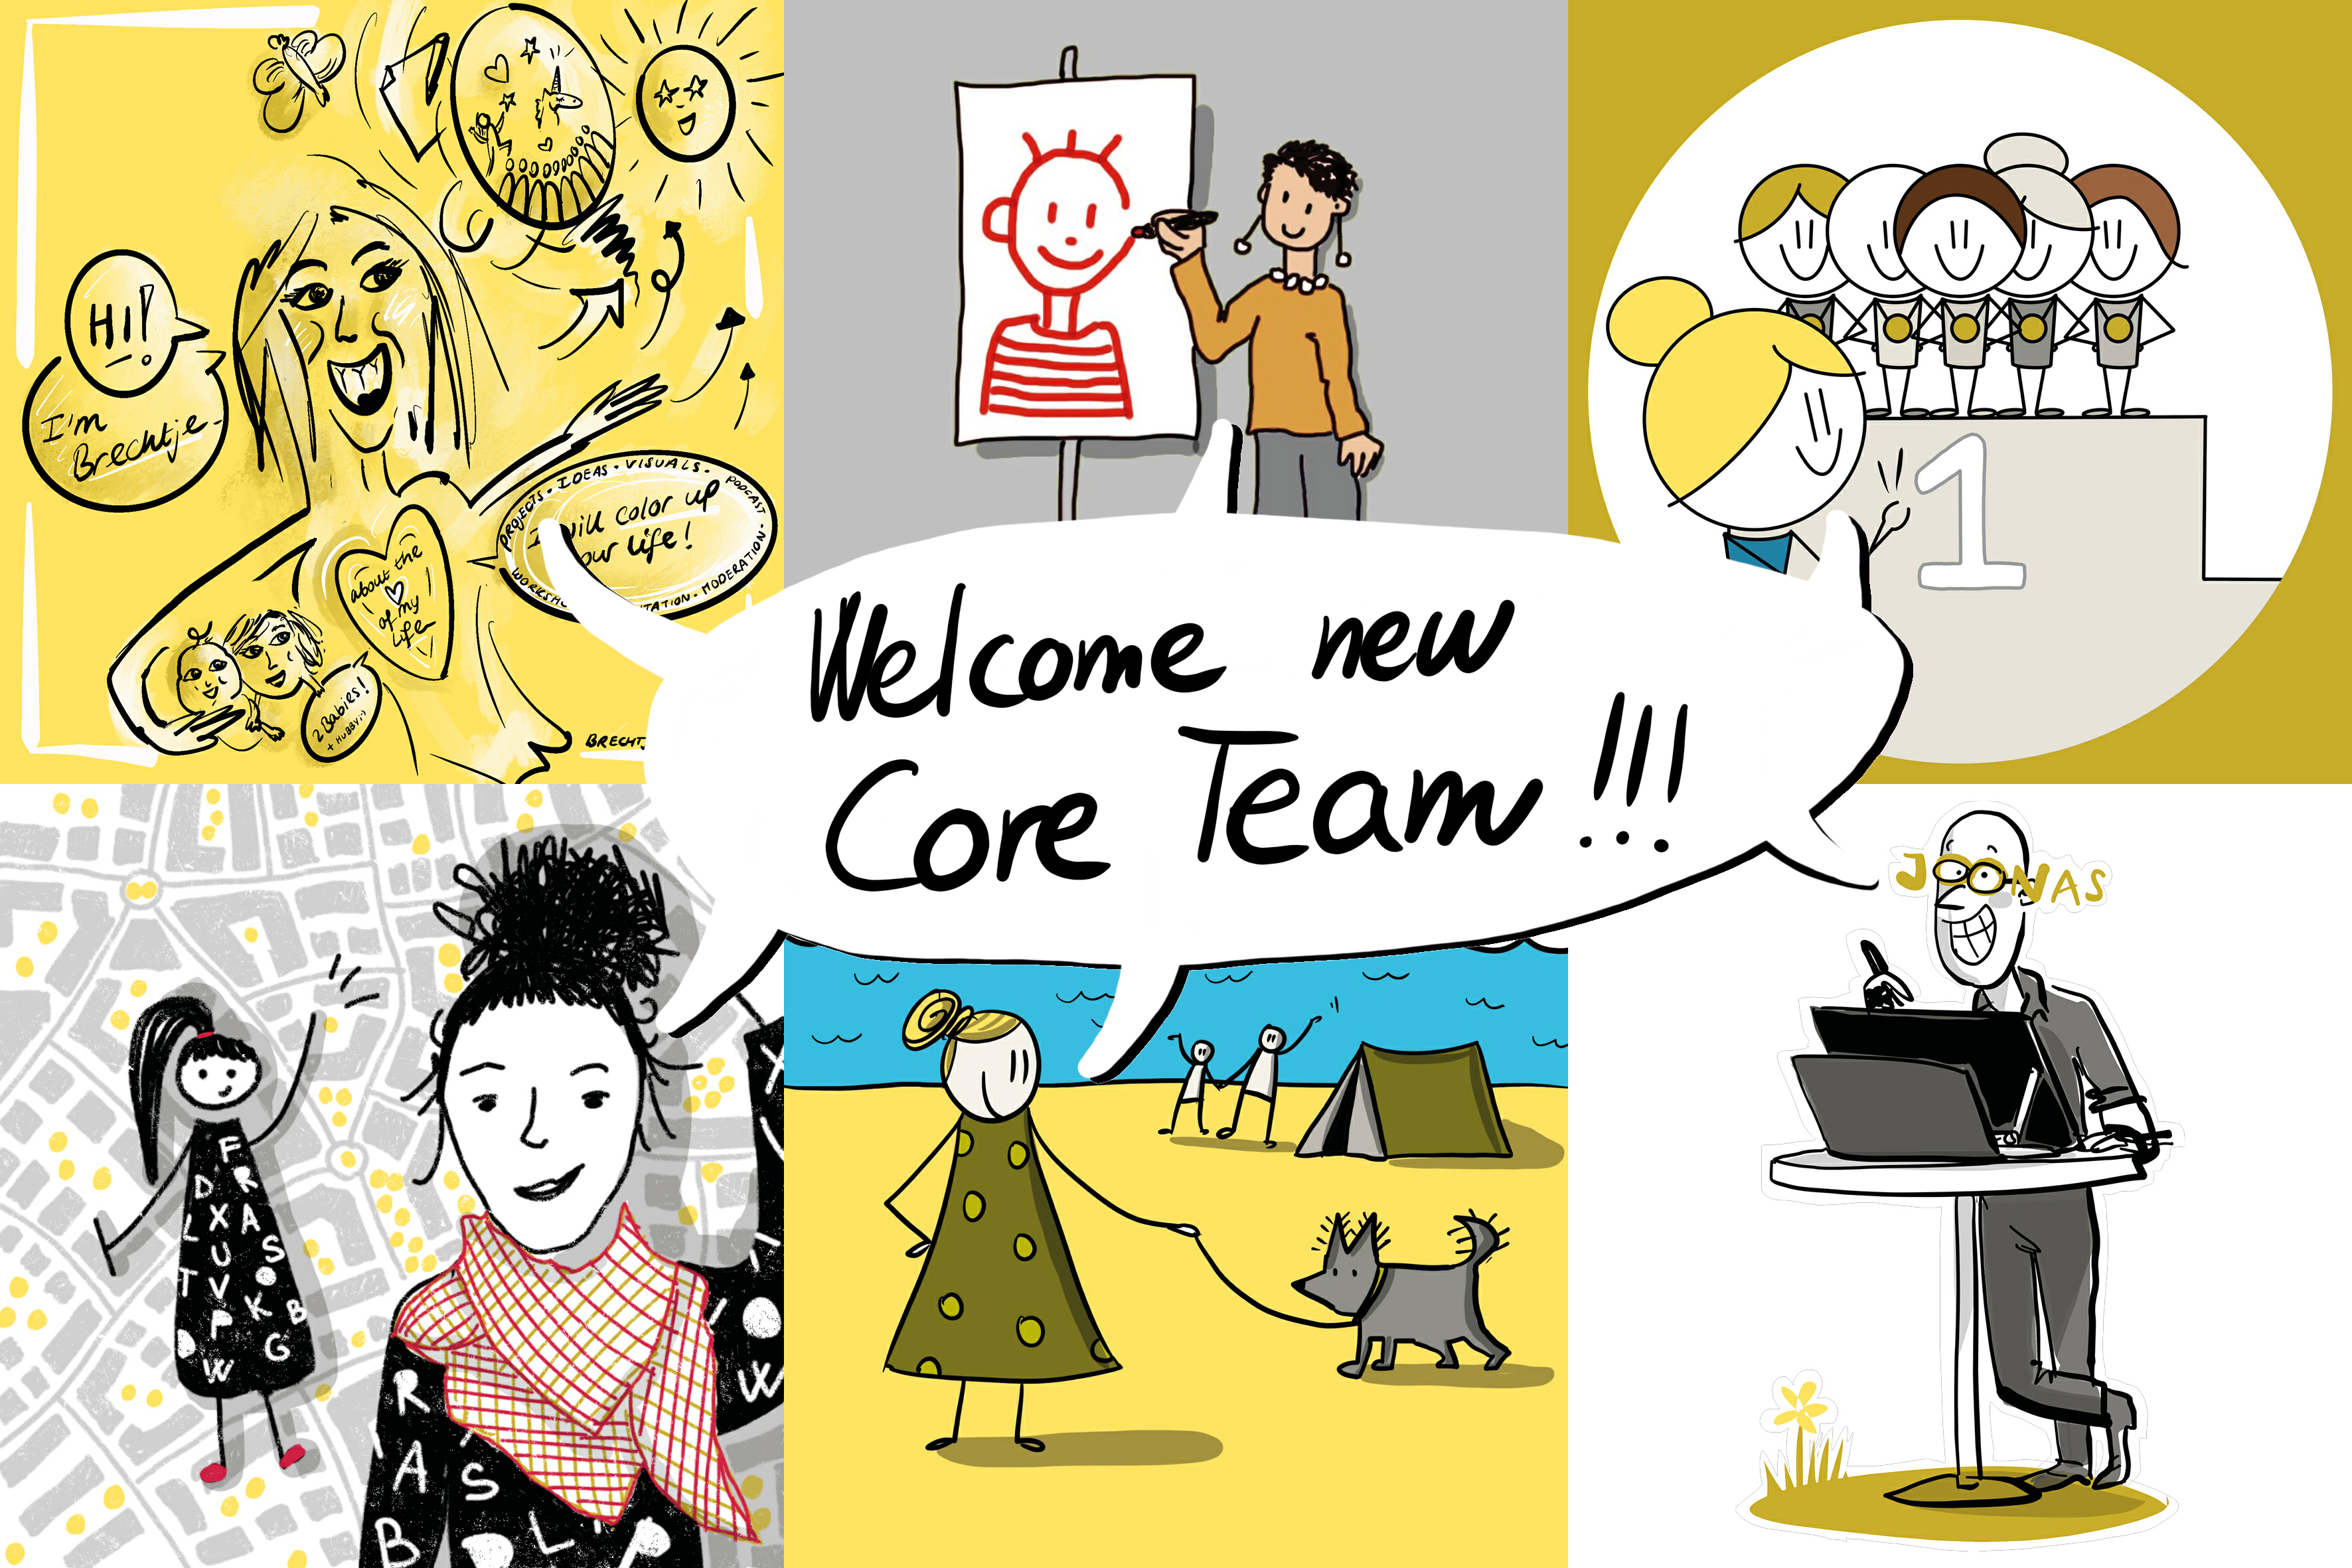 The new core team!